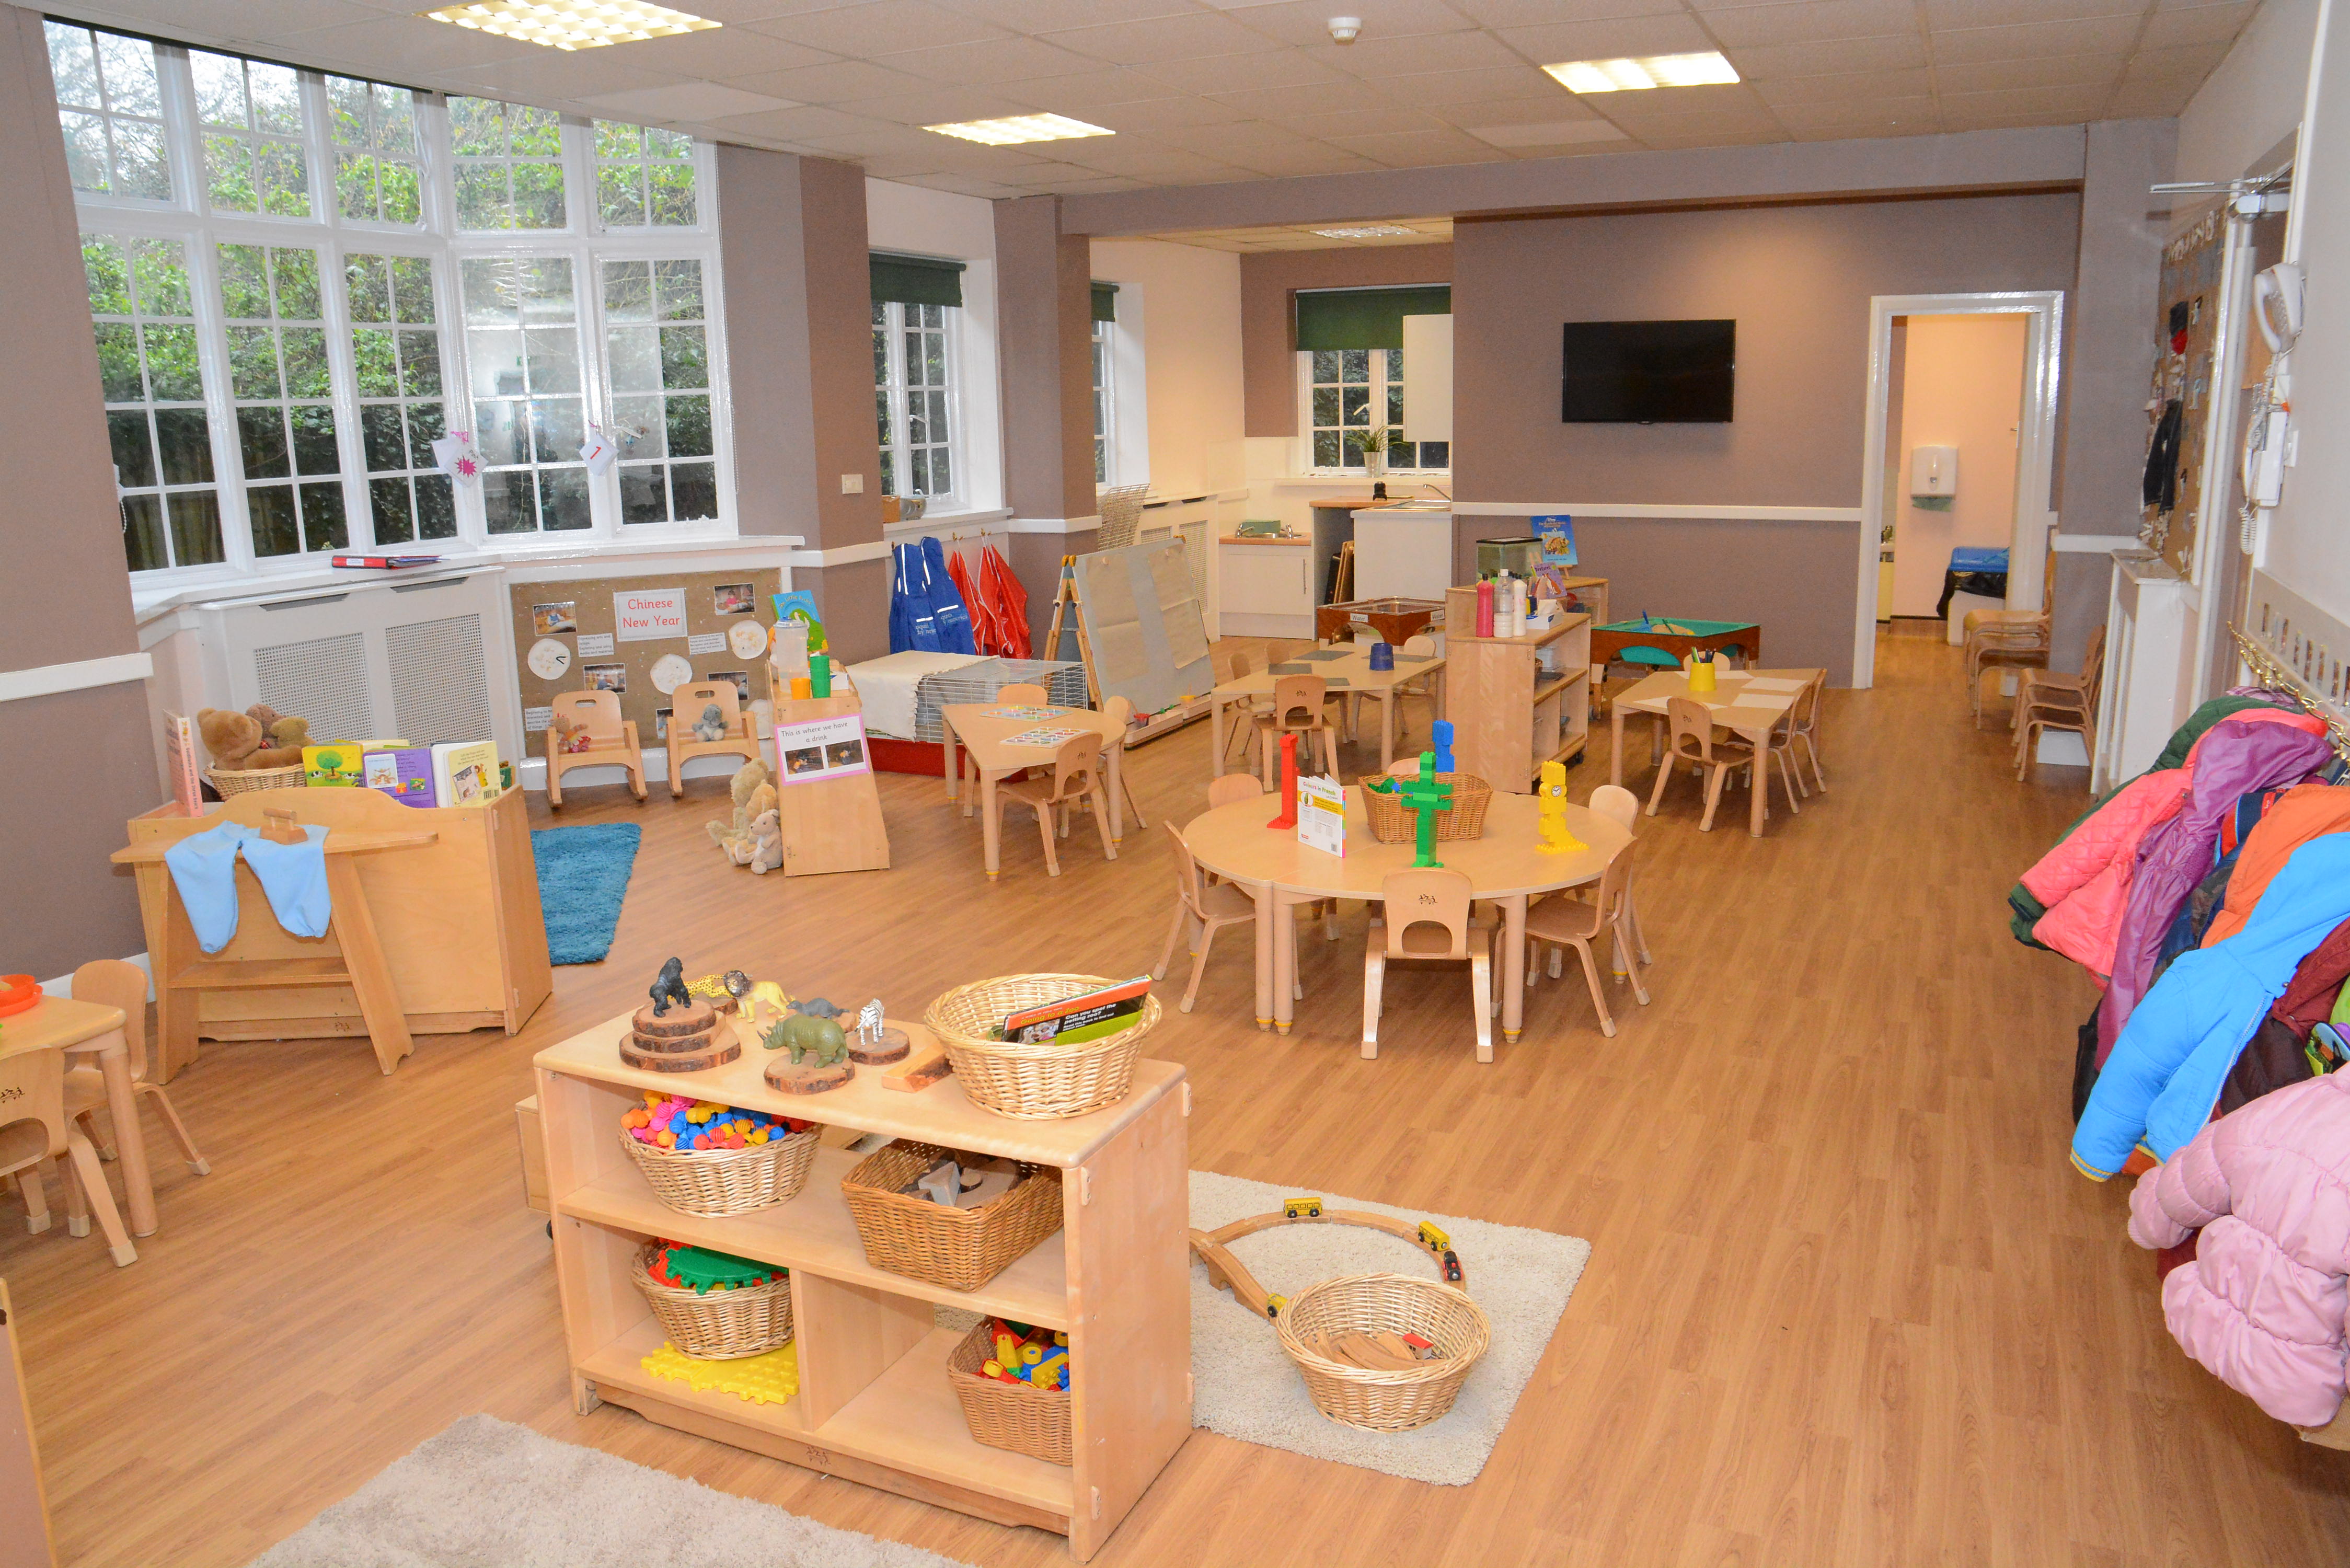 Images Bright Horizons Hatch End Day Nursery and Preschool